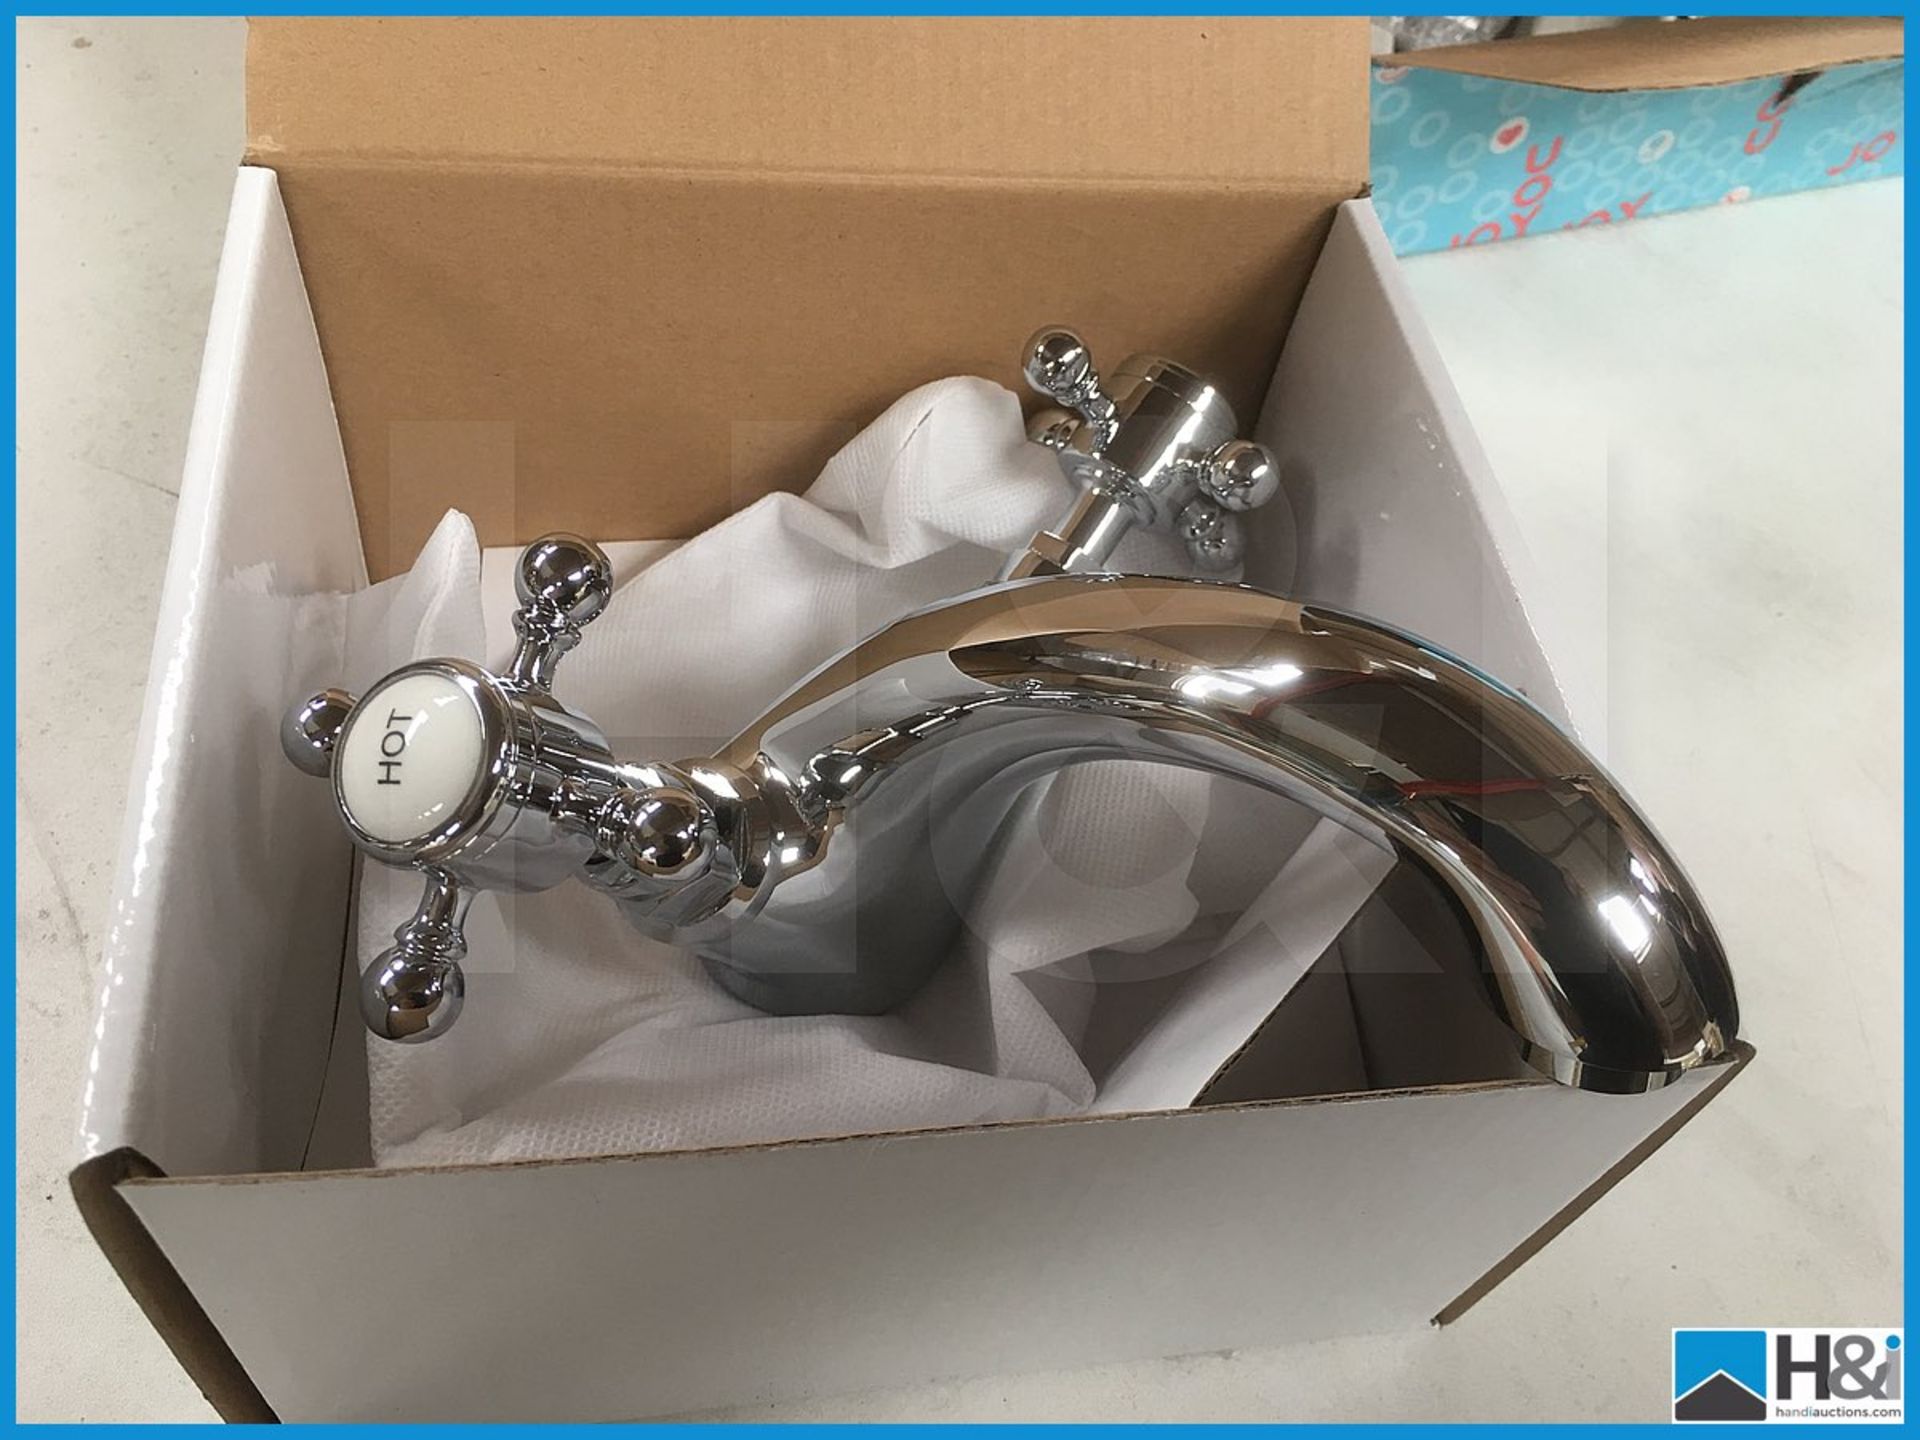 Designer TED HF305 mono basin mixer in polished chrome finish. New and boxed. Suggested